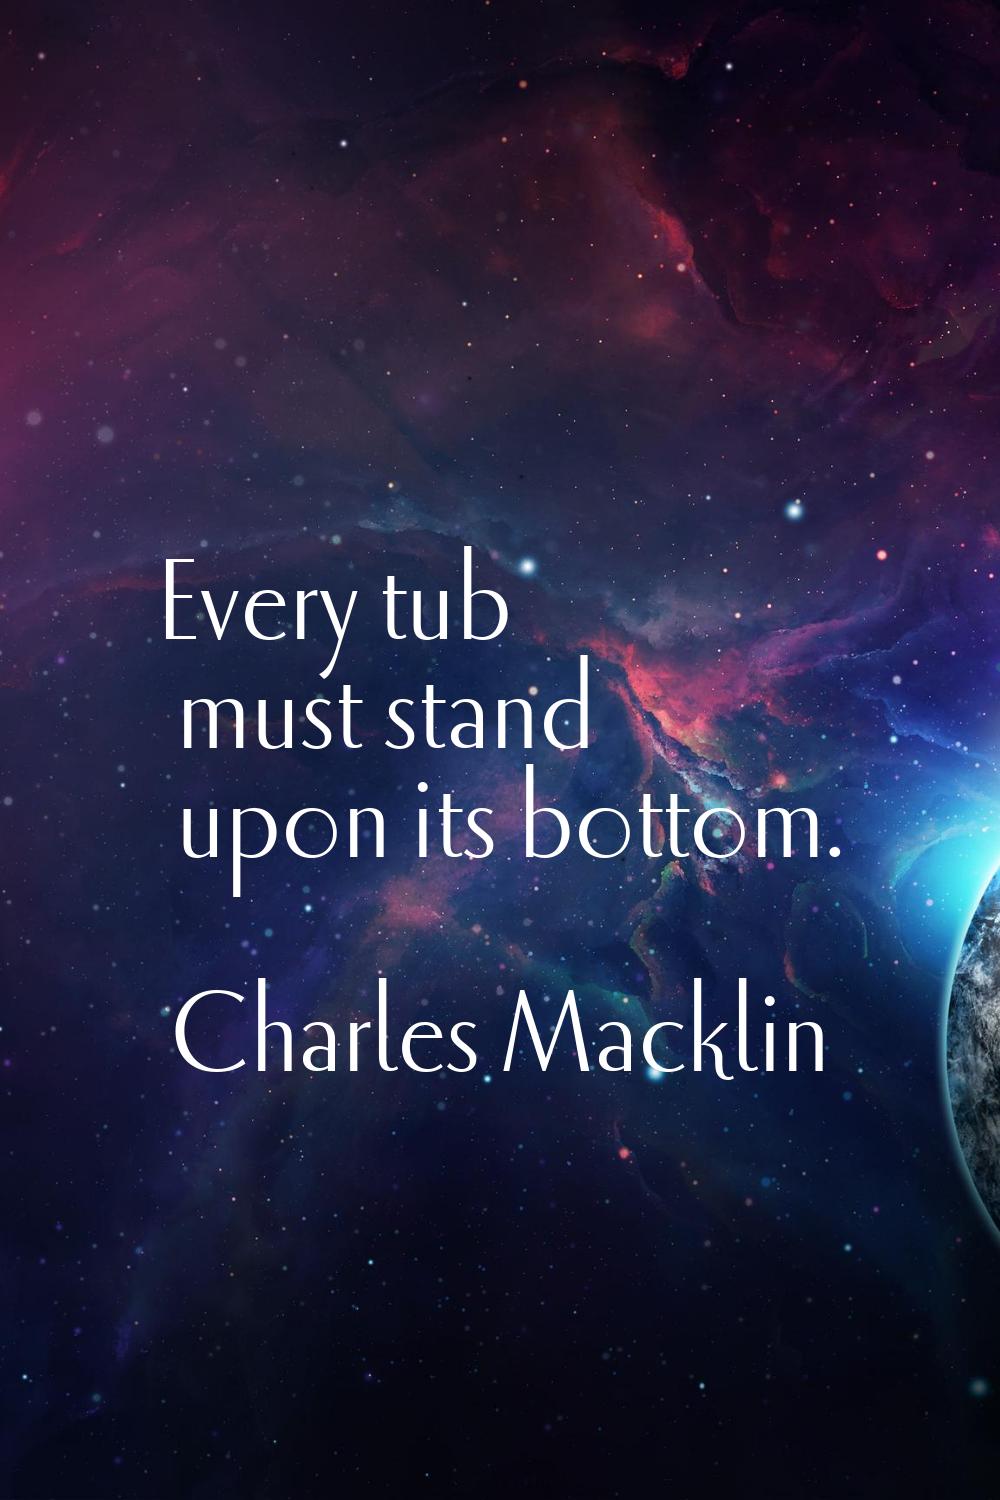 Every tub must stand upon its bottom.